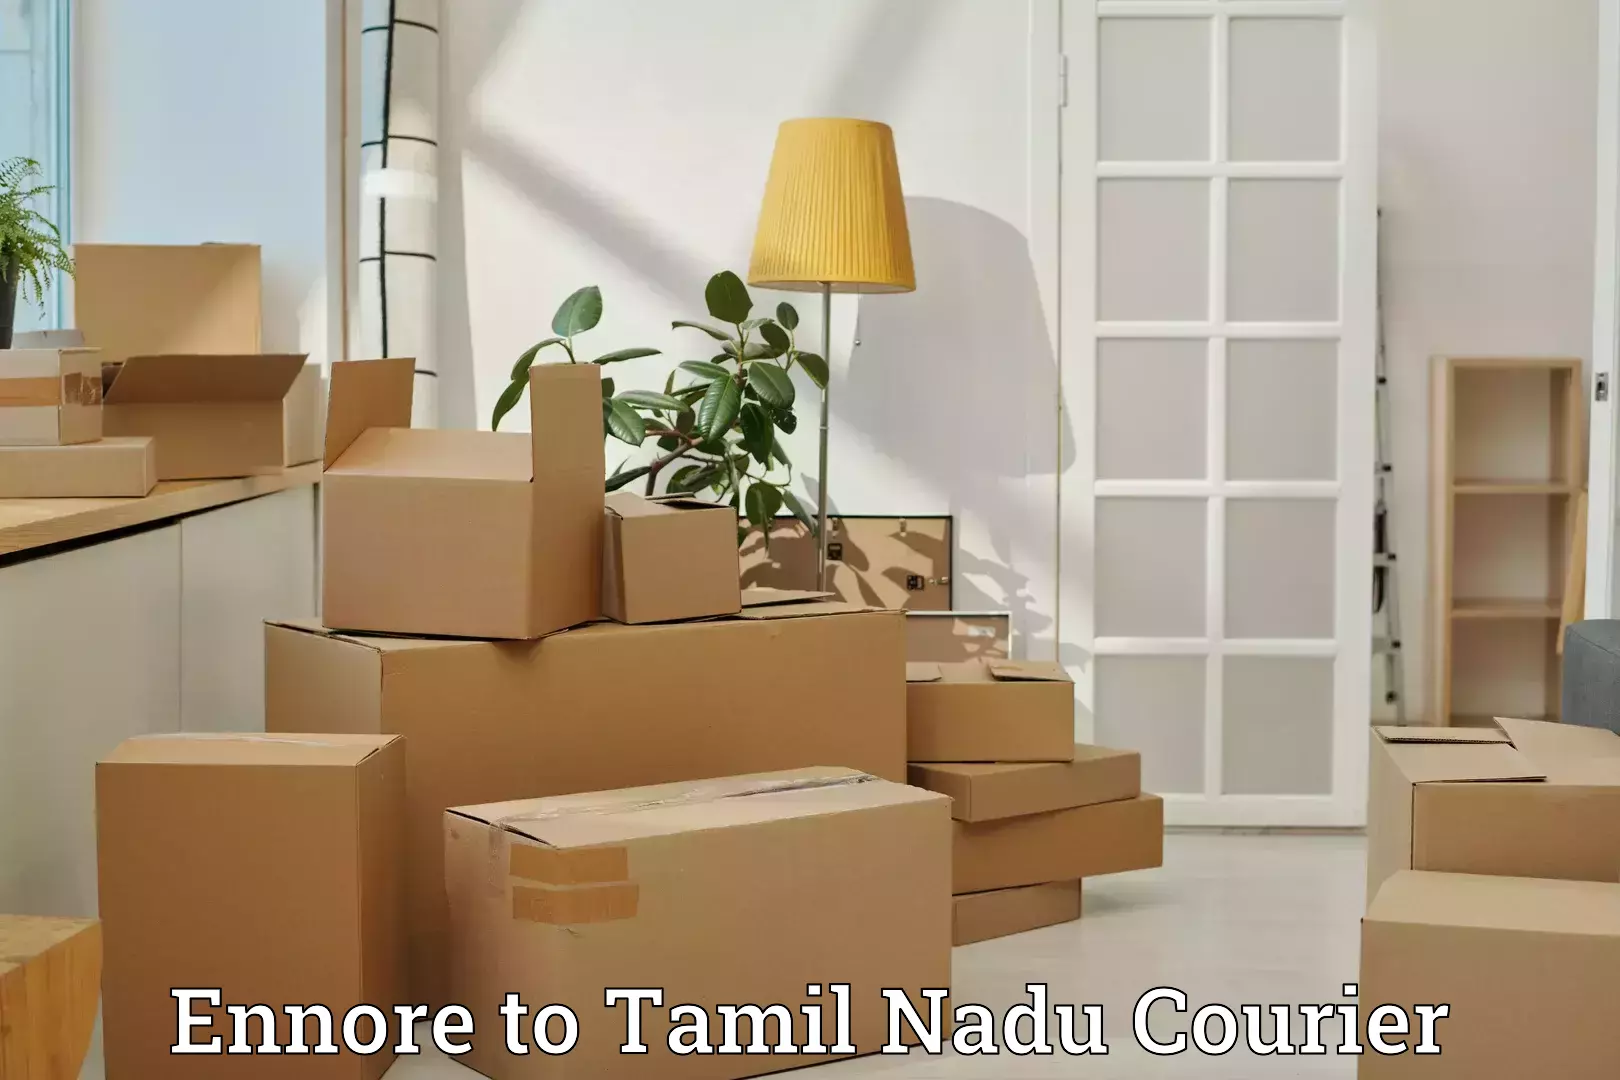 Luggage transport consultancy Ennore to Tamil Nadu